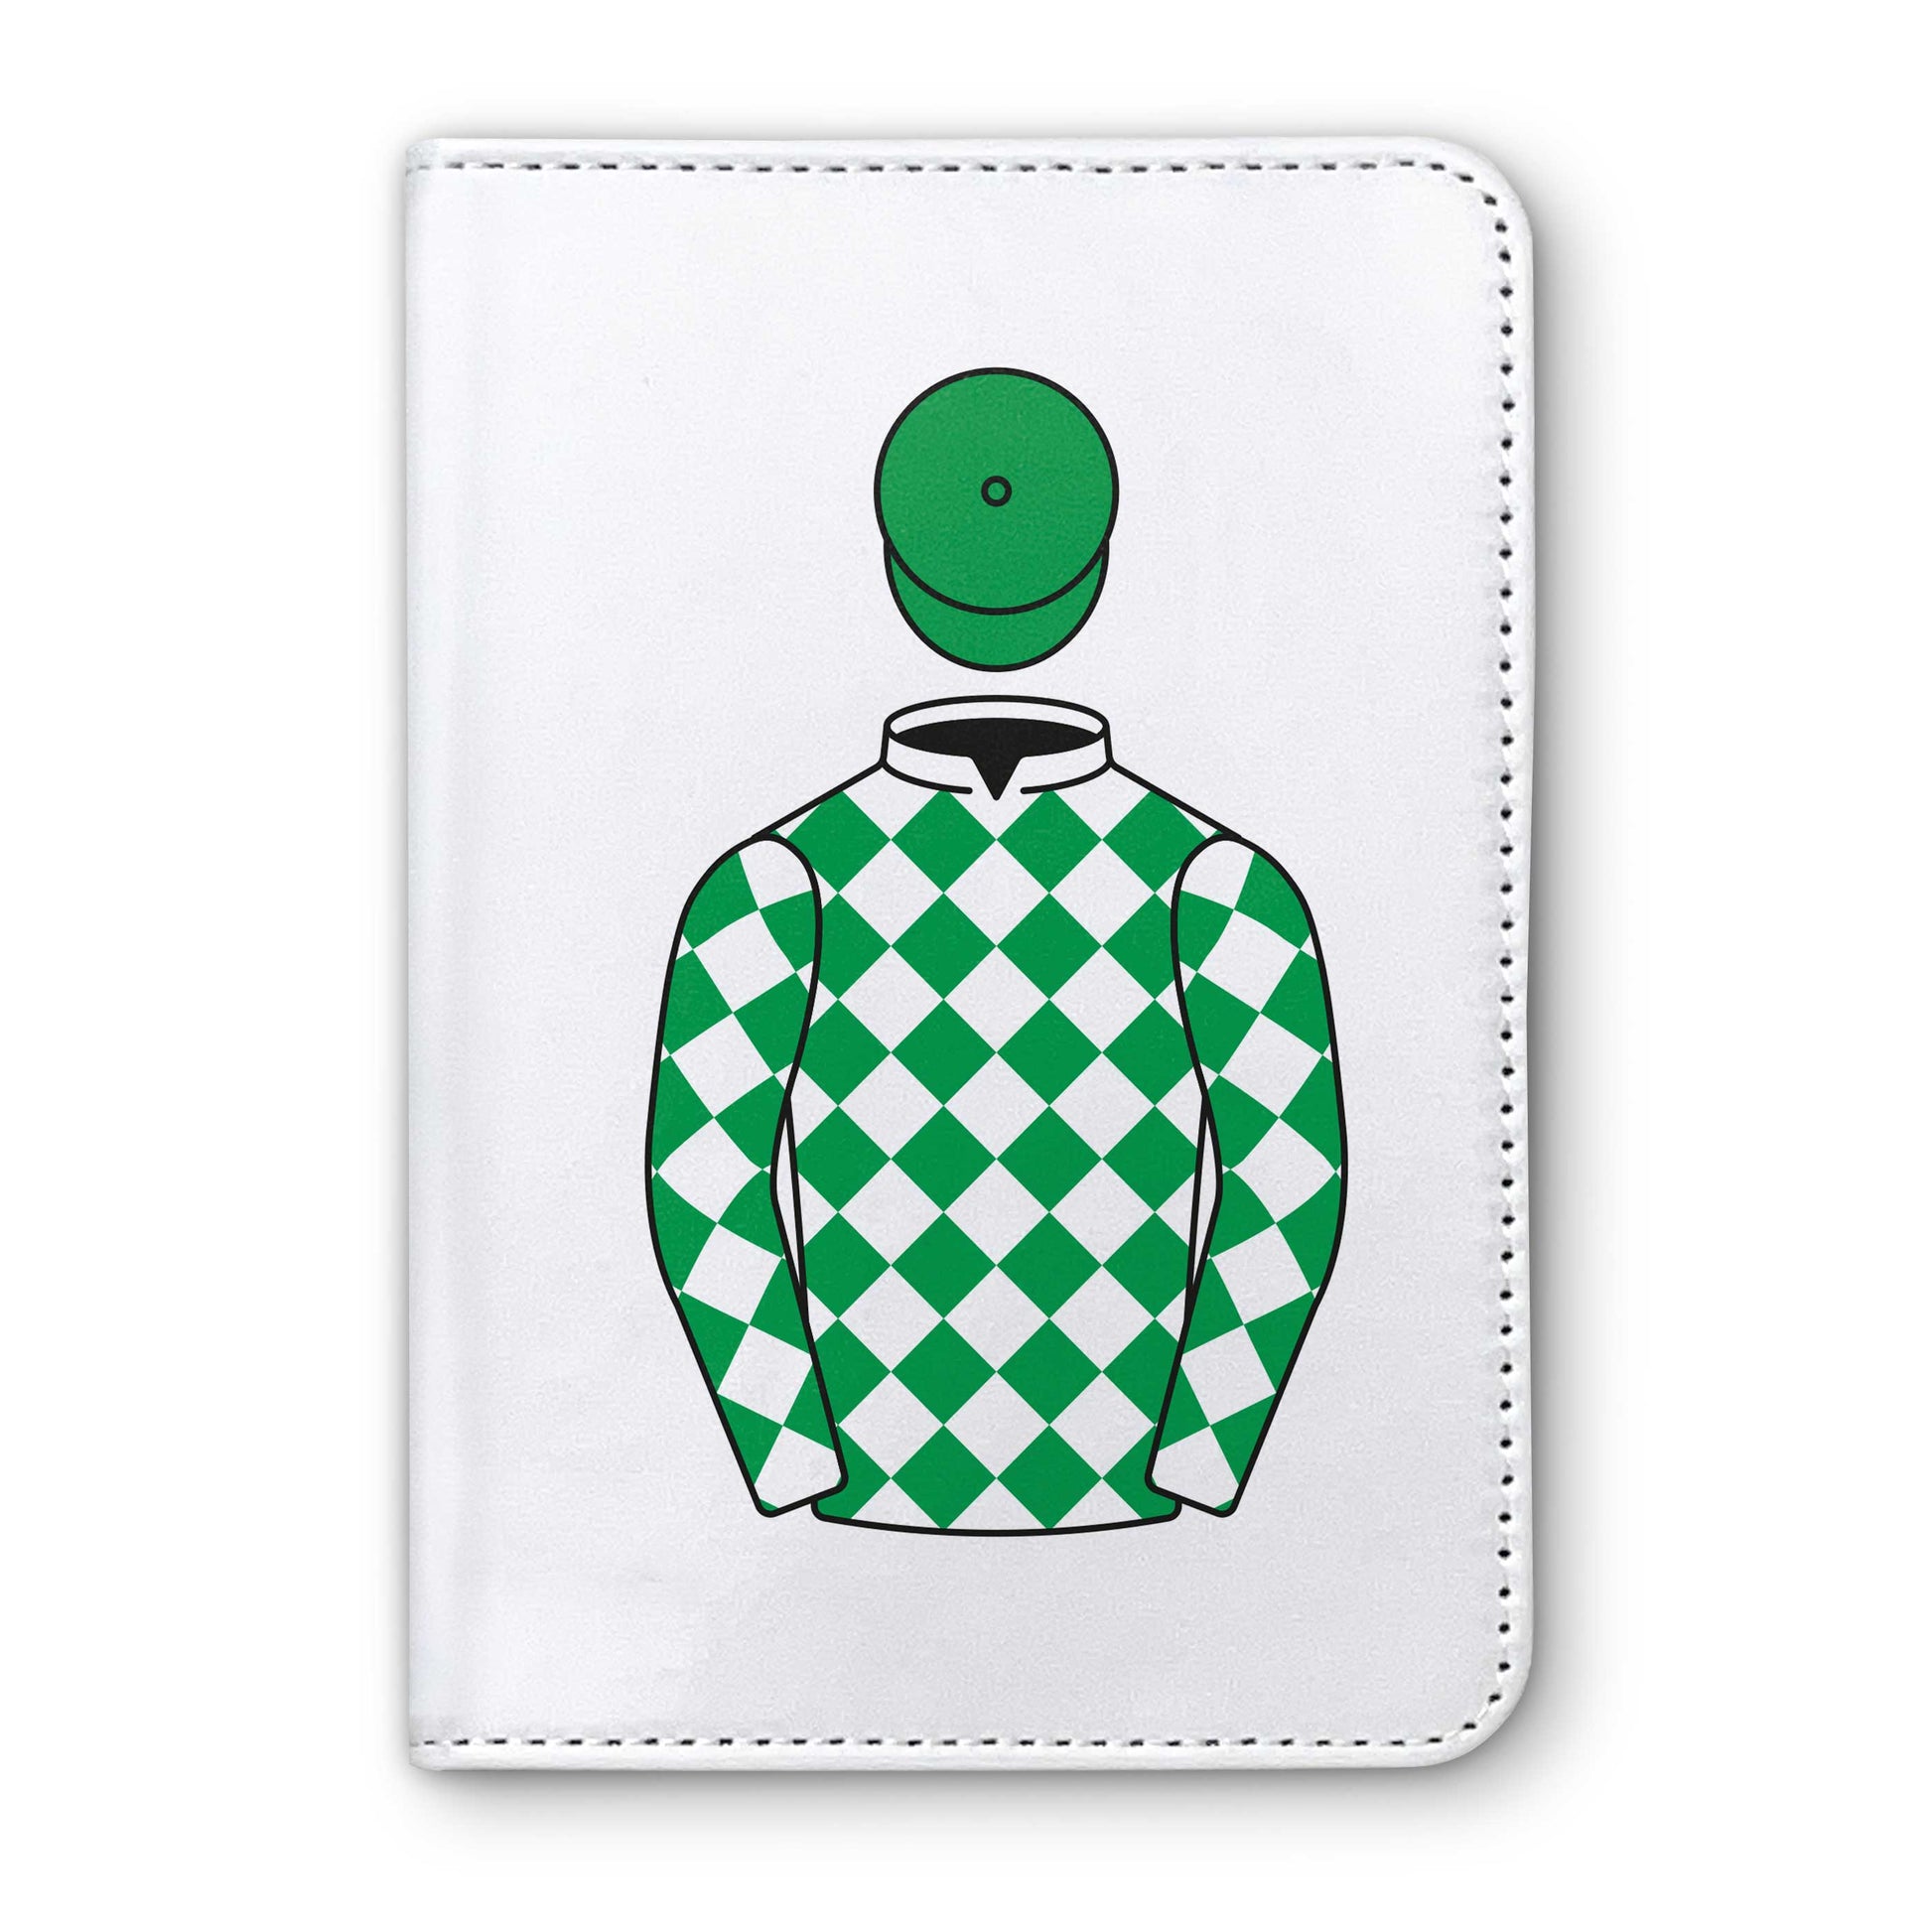 T F P Partnership Horse Racing Passport Holder - Hacked Up Horse Racing Gifts